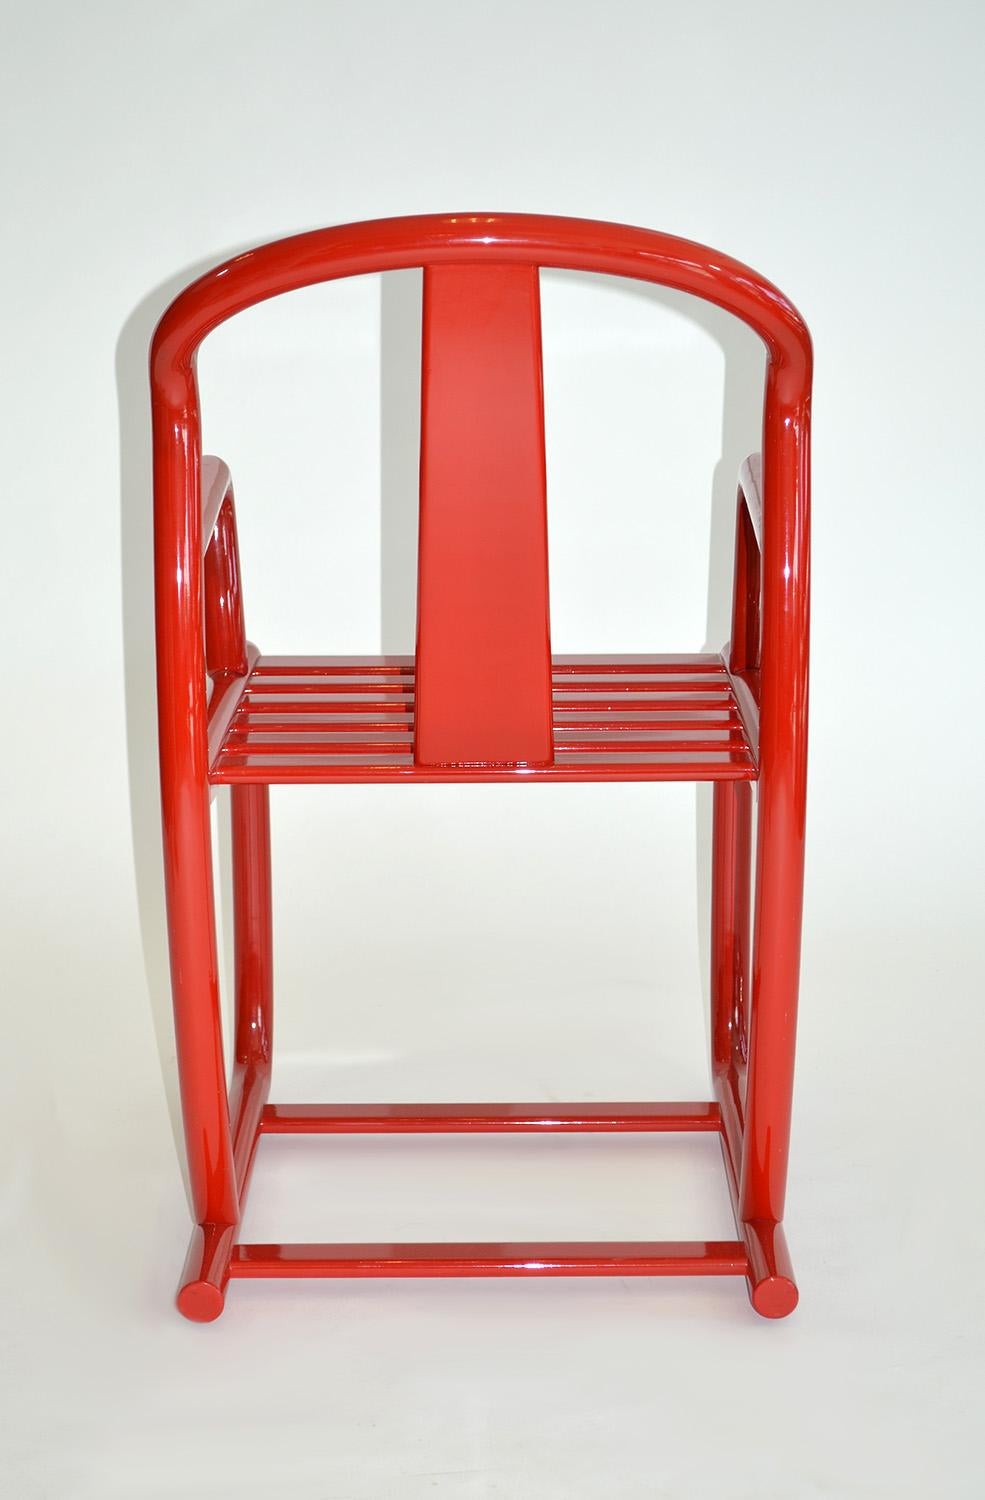 Italian Set of Four Modern Dining Chairs in Red Lacquer, Italy, 1980s For Sale